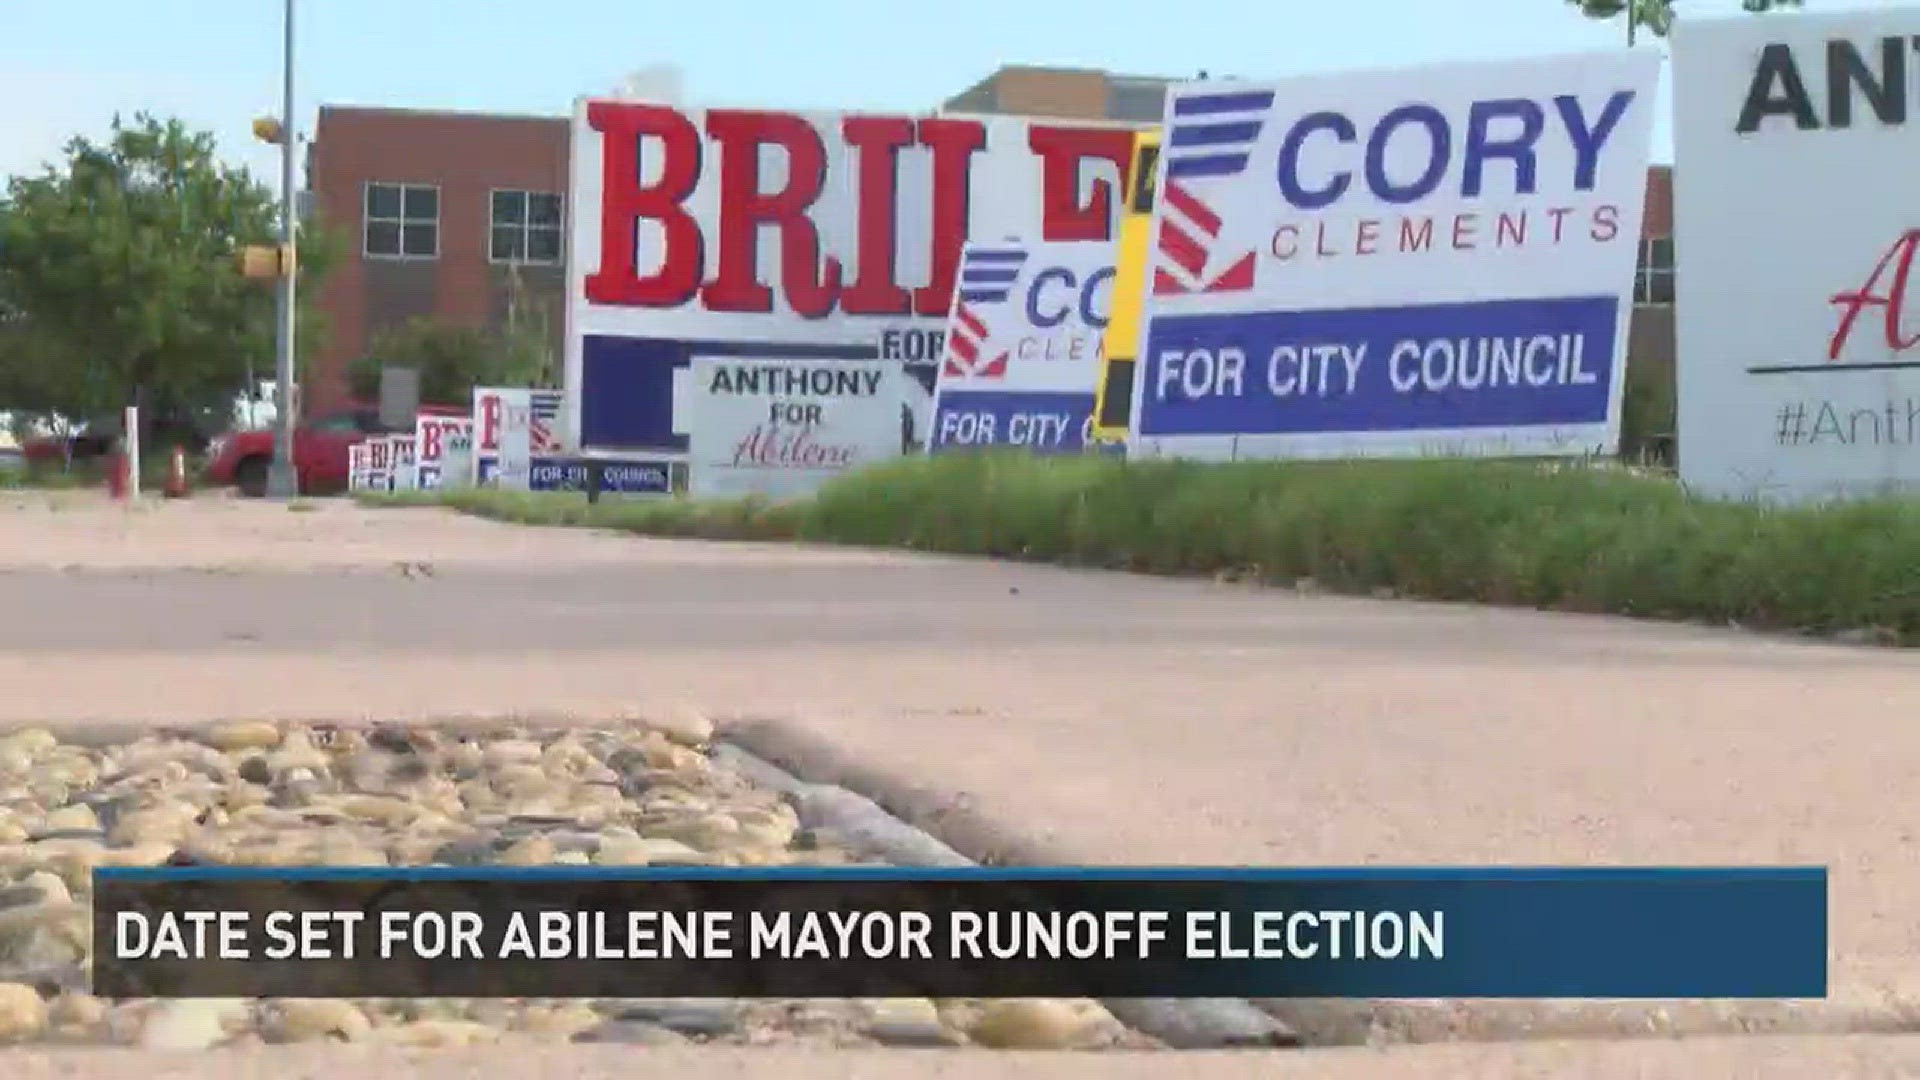 The city has officially set the runoff election for mayor for June 17.